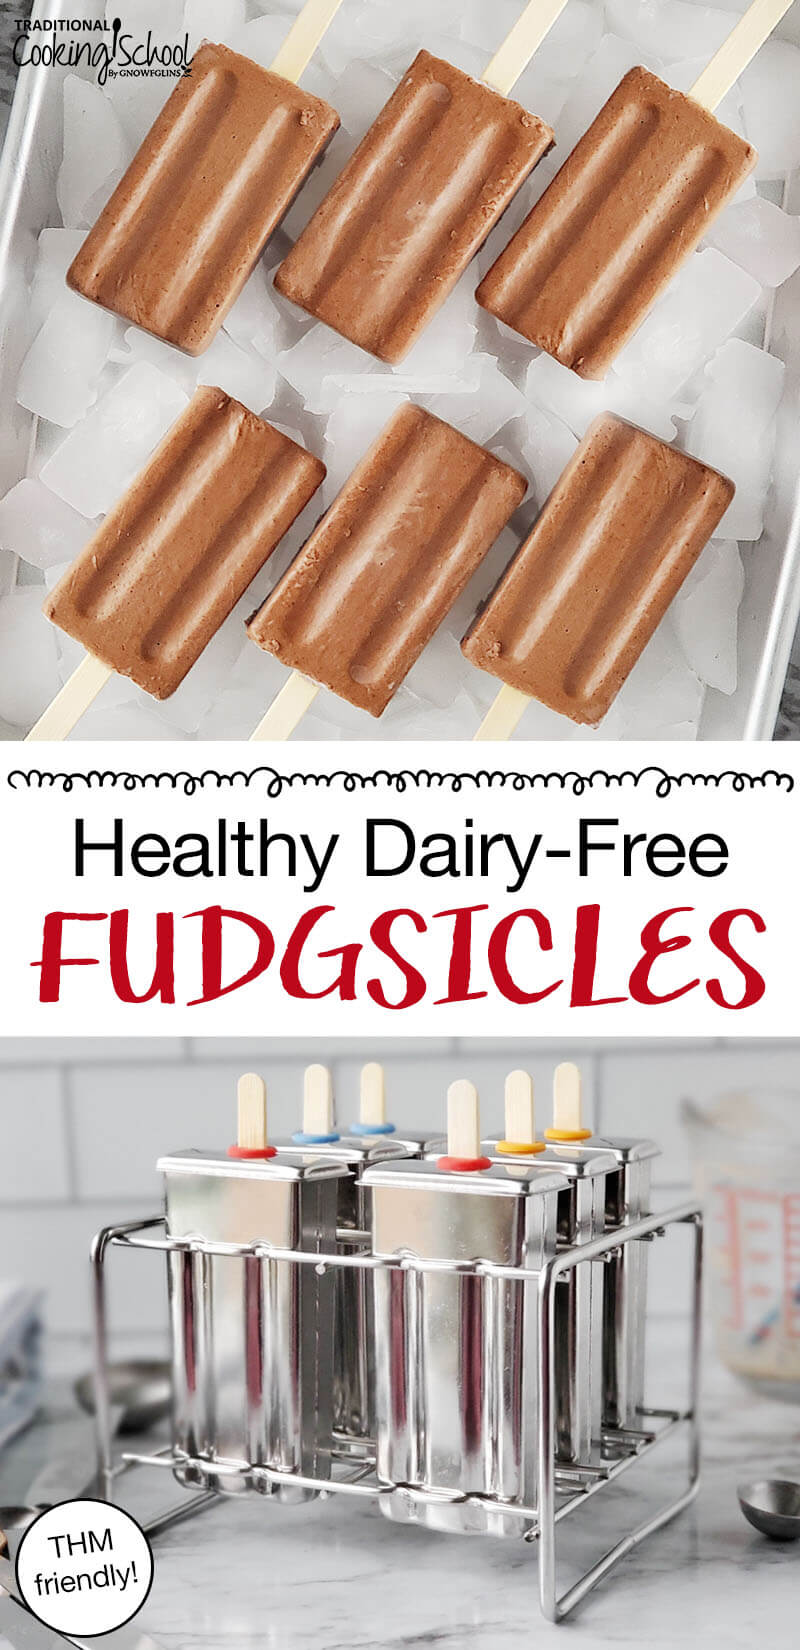 photo collage of popsicle molds and chocolate popsicles arranged on an tray of ice cubes. Text overlay says: "Healthy Dairy-Free Fudgsicles (sugar-free options, too!)"